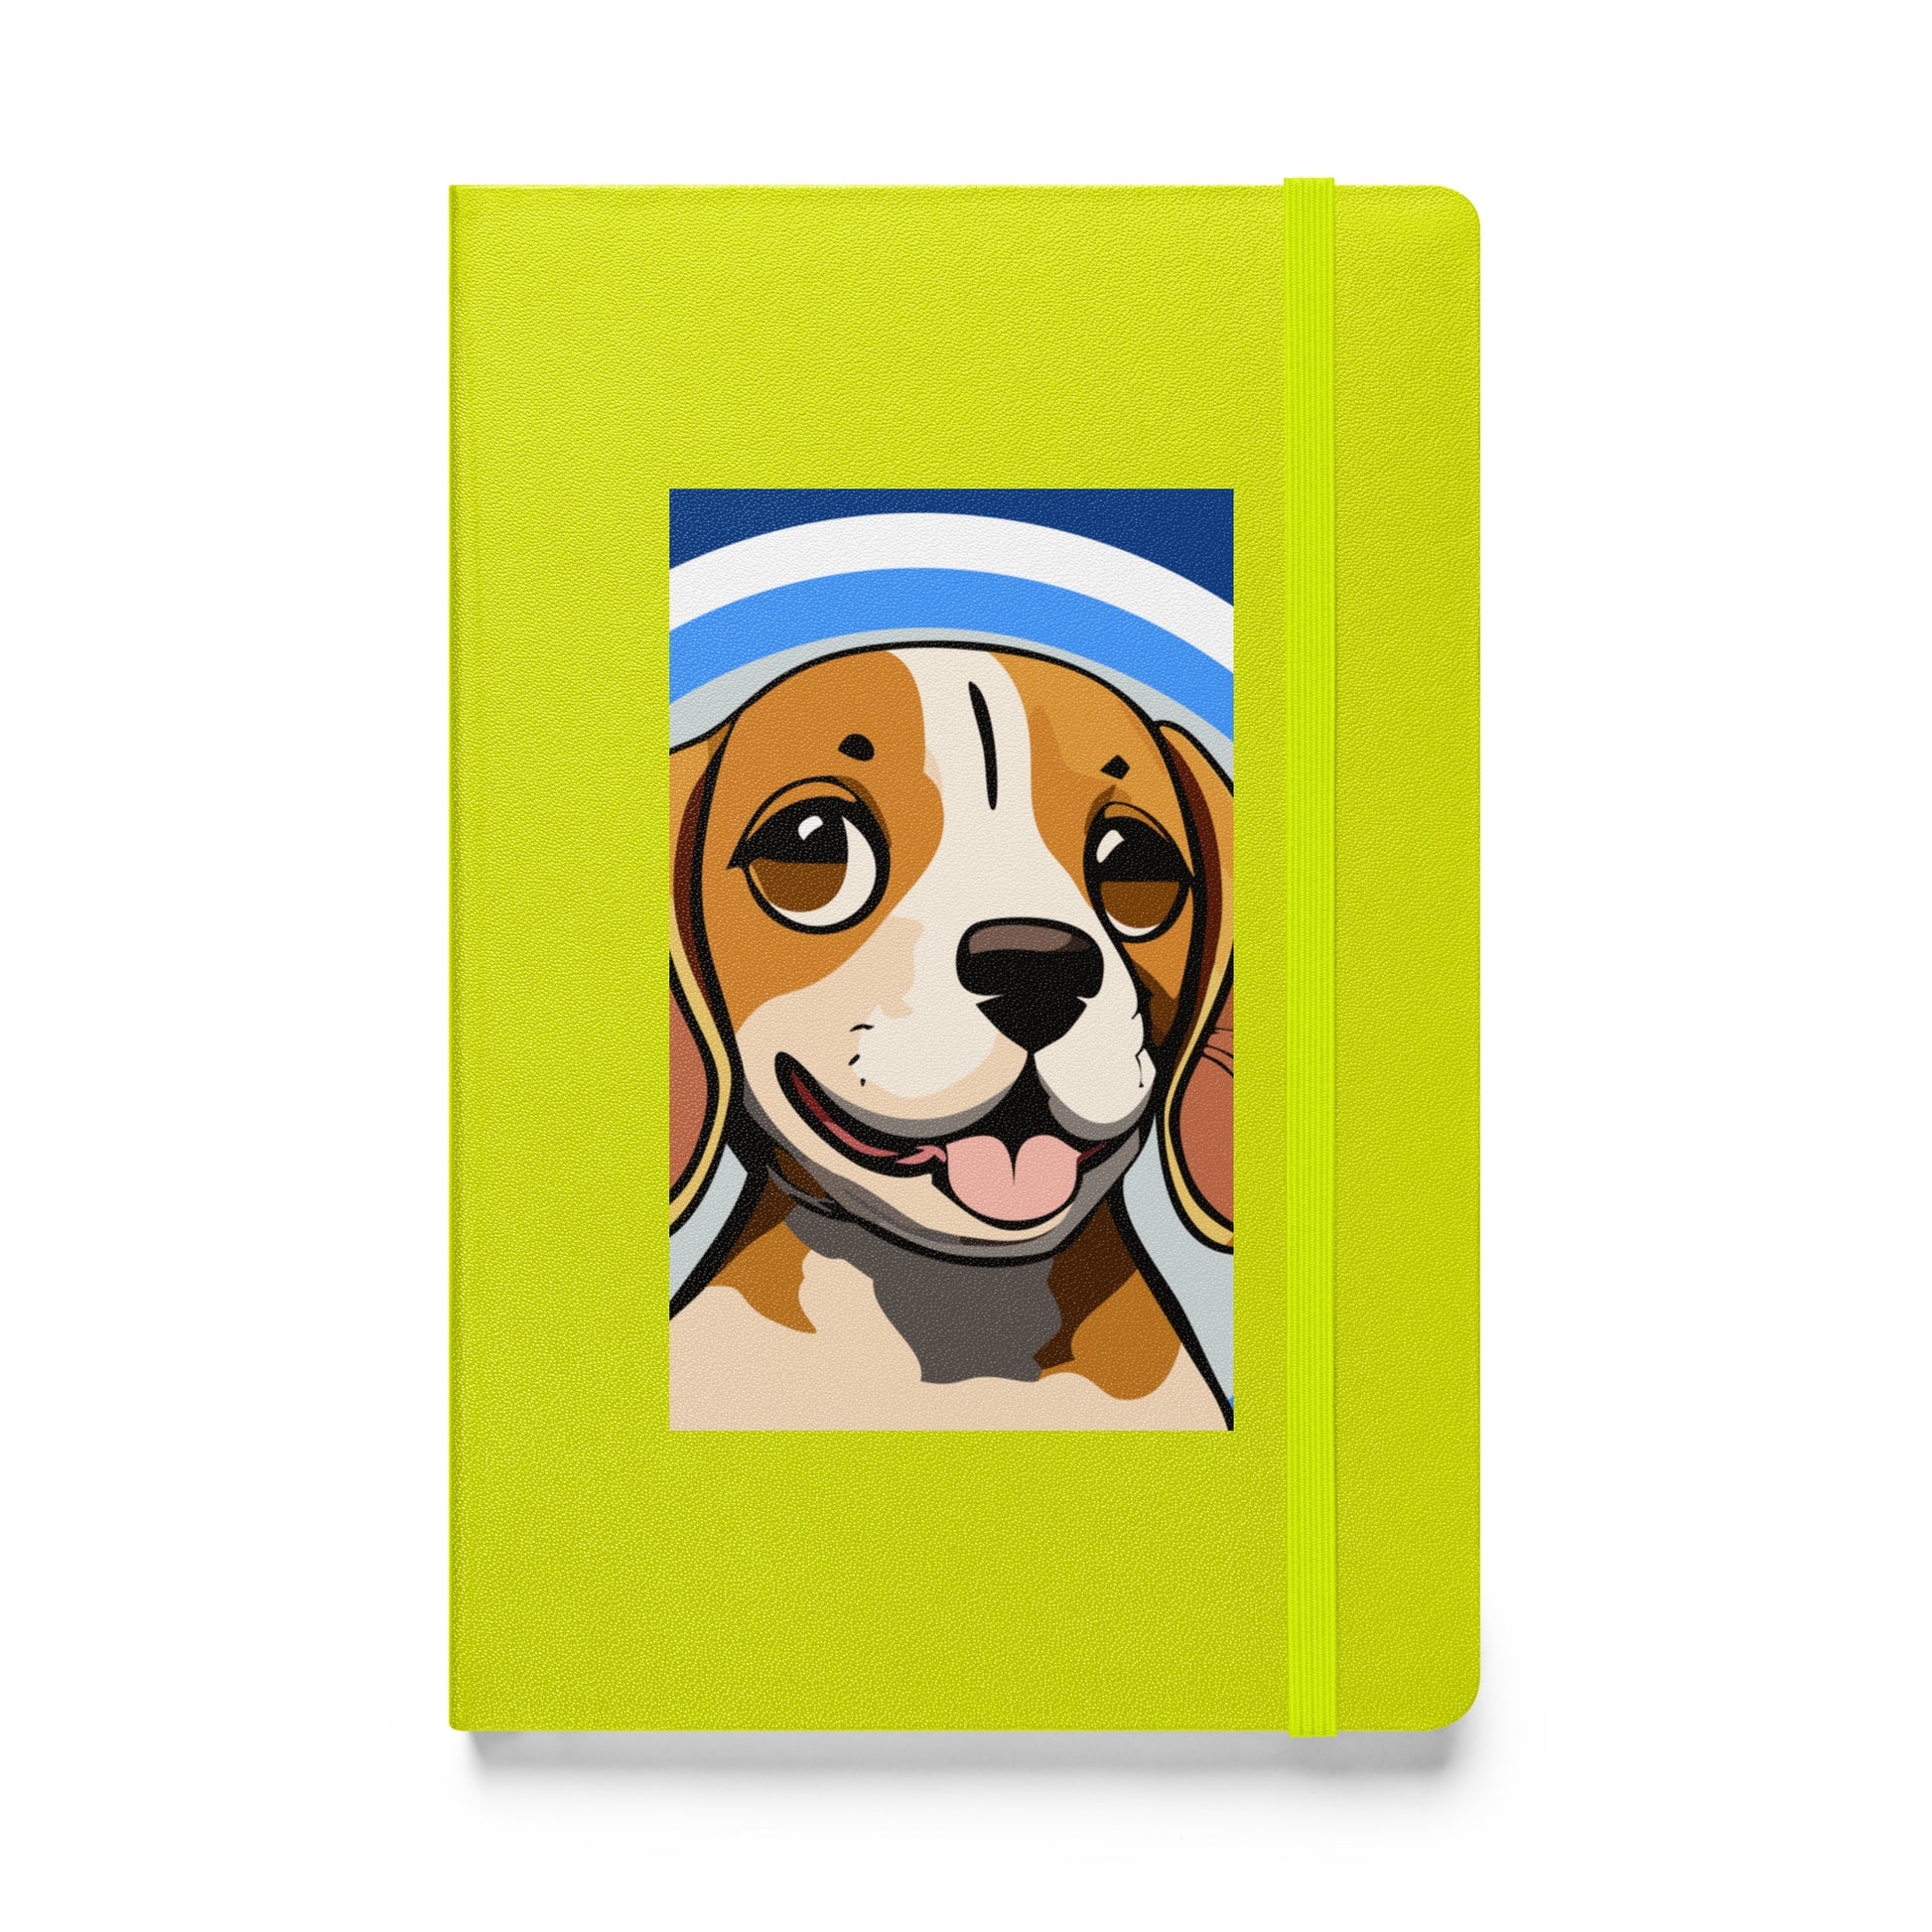 Hardcover notebook in lime yellow, with cute beagle on cover